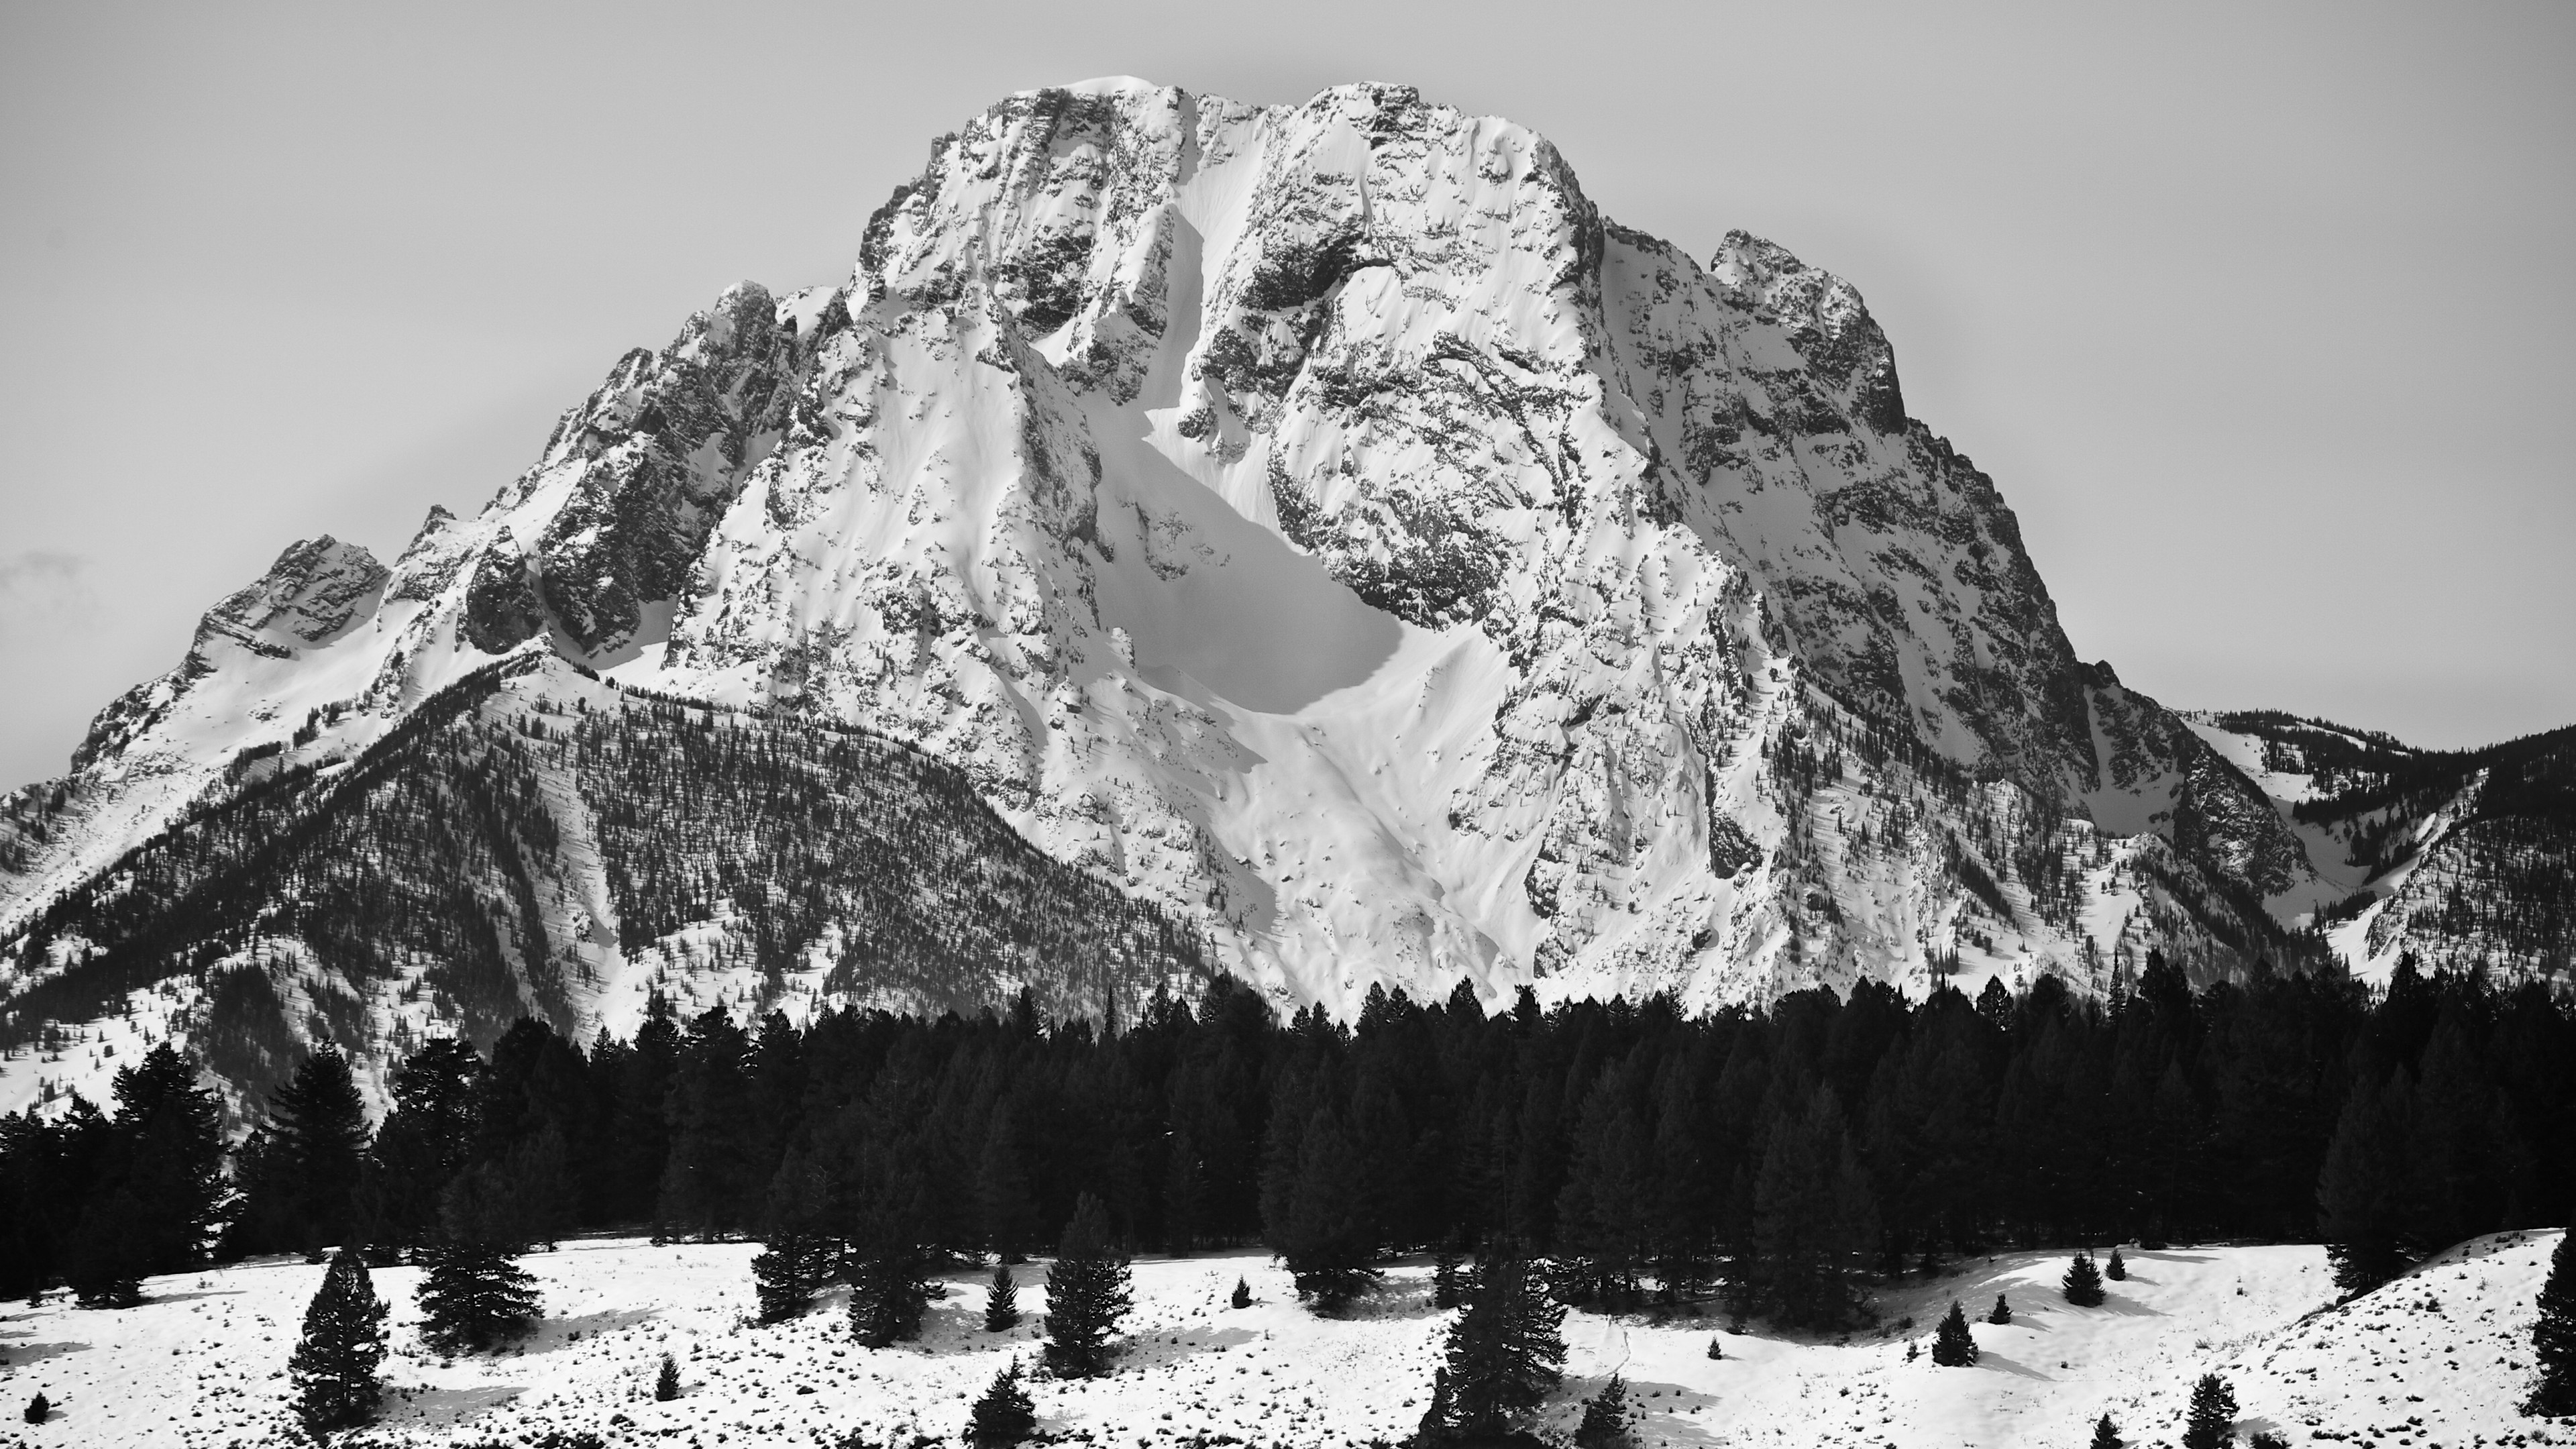 Black and White Mountains 4K Landscape Wallpaper Download Macbook